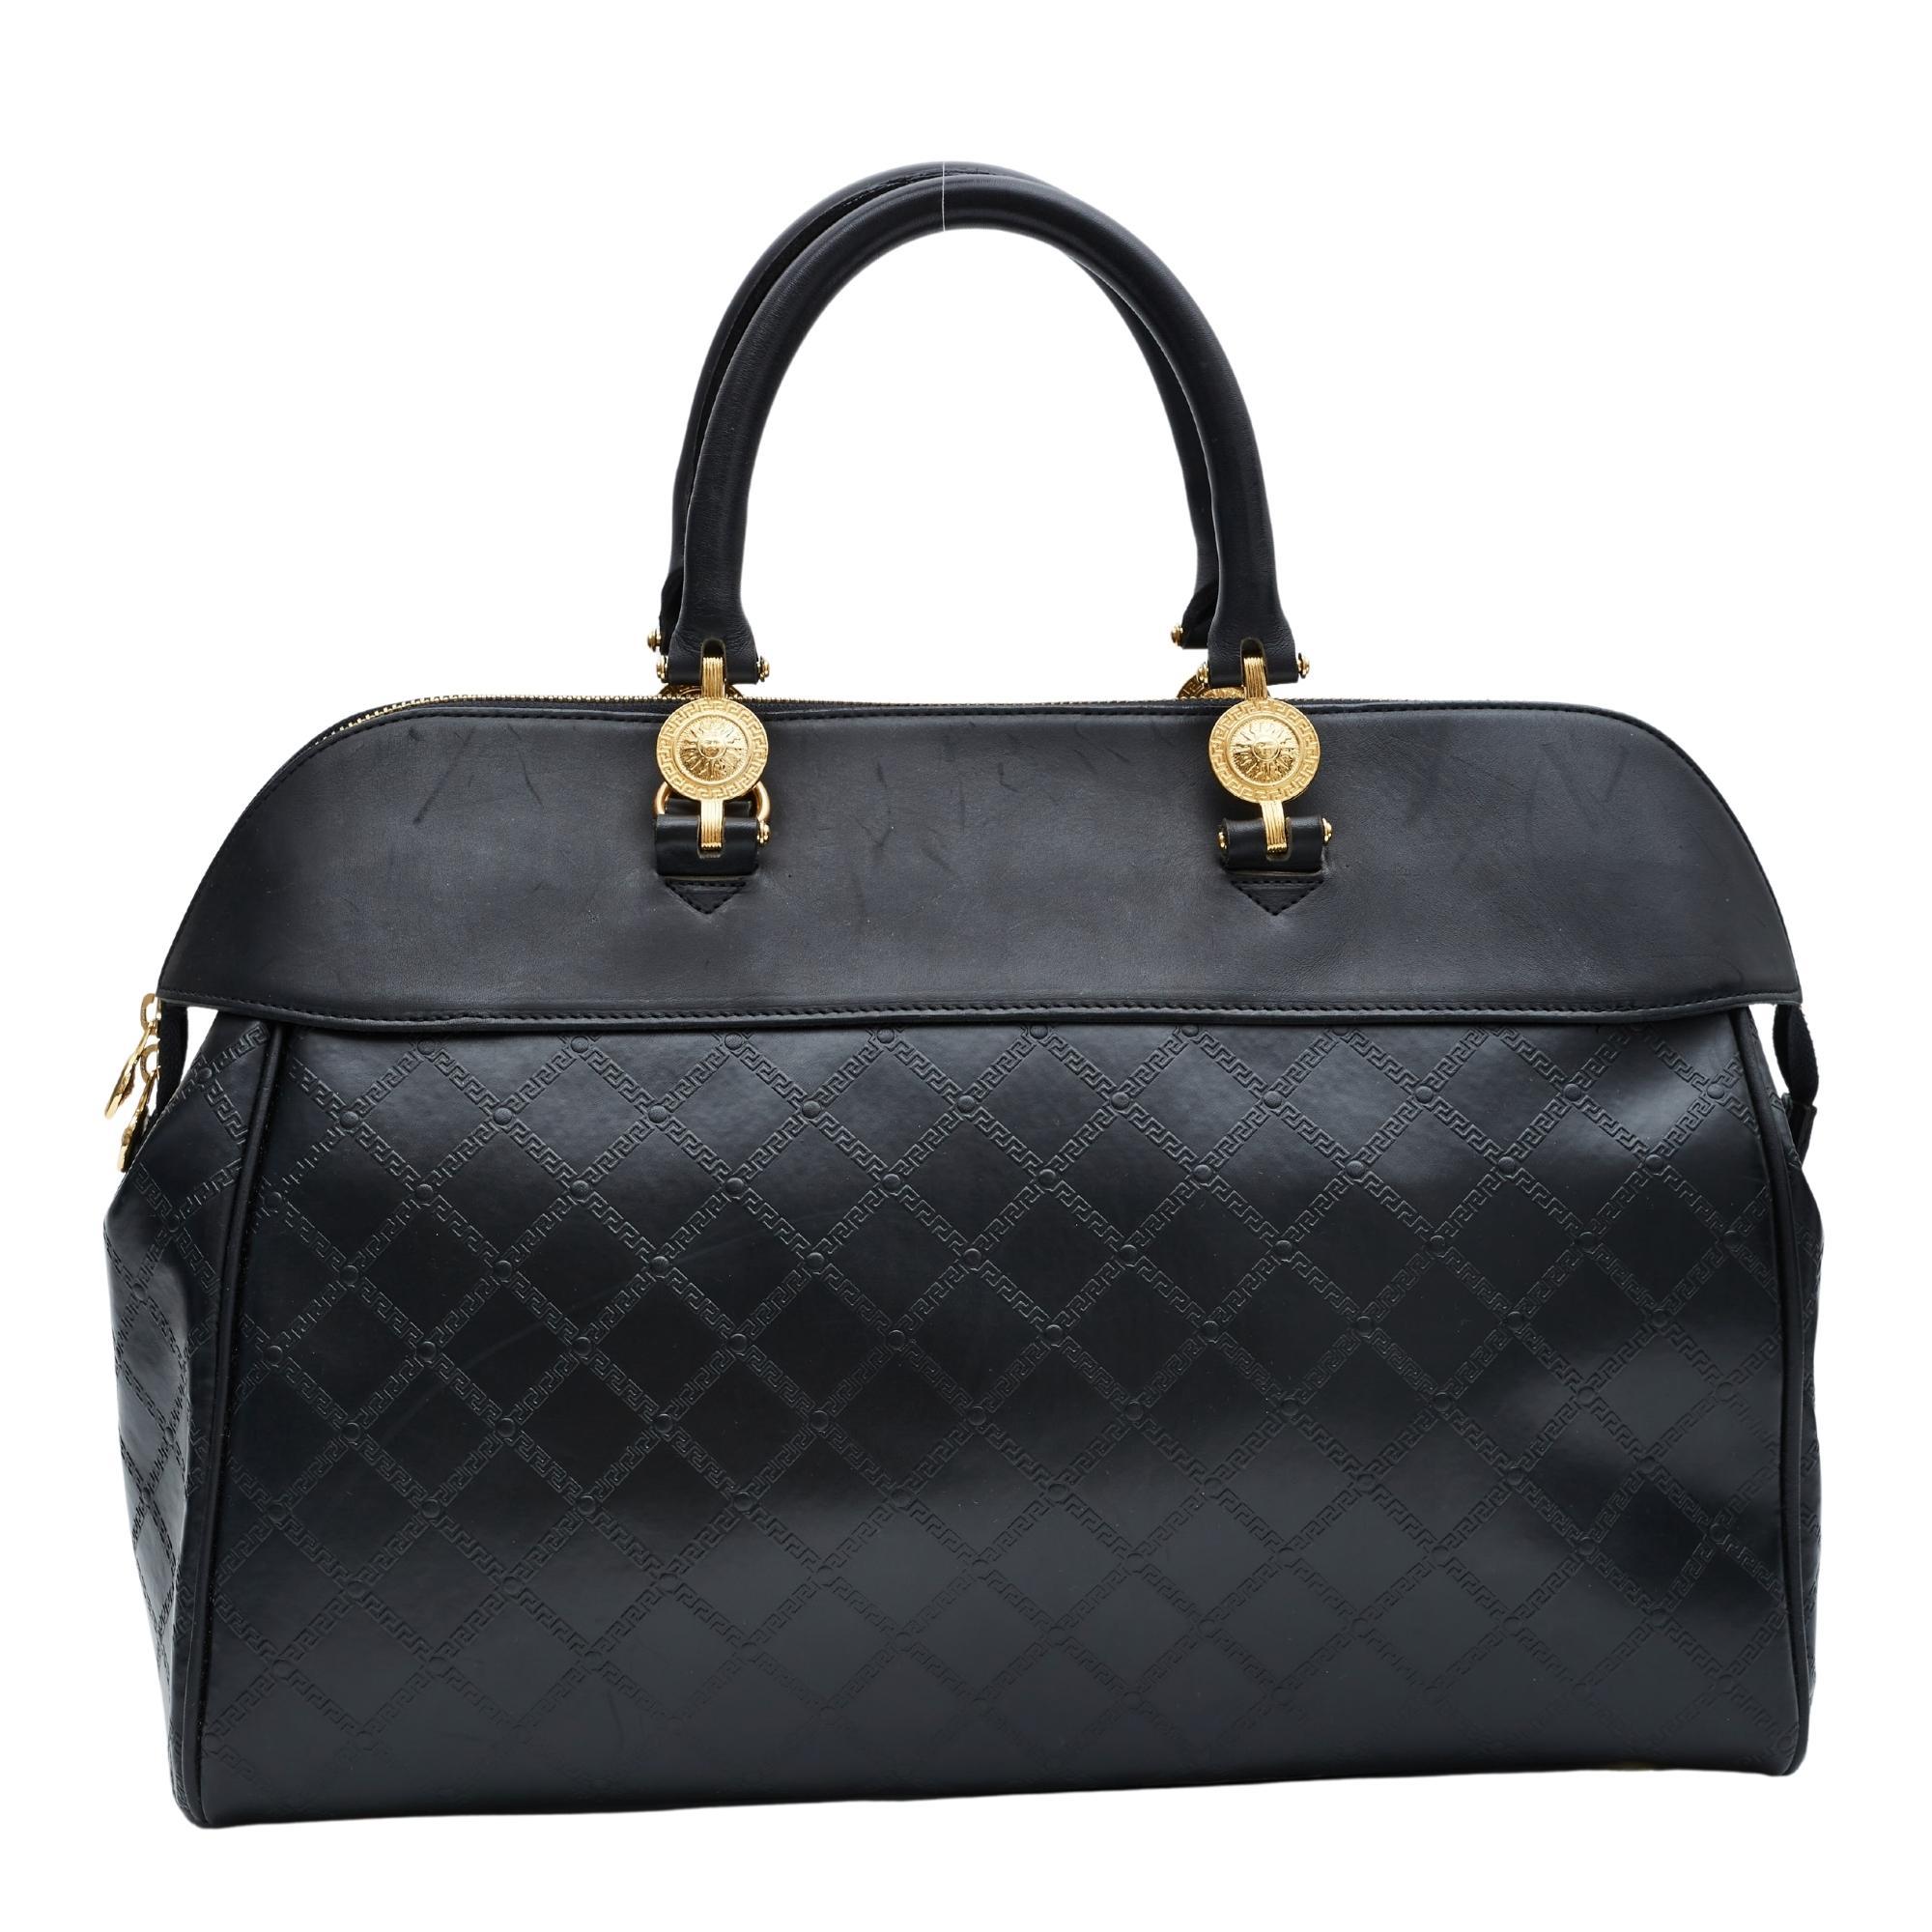 This vintage Versace bag is made with a smooth matte black leather superior part and a body of shiny motif embossed leather. The matte black leather and shiny motif embossed leather placed in juxtaposition to each other creates a luxurious effect.